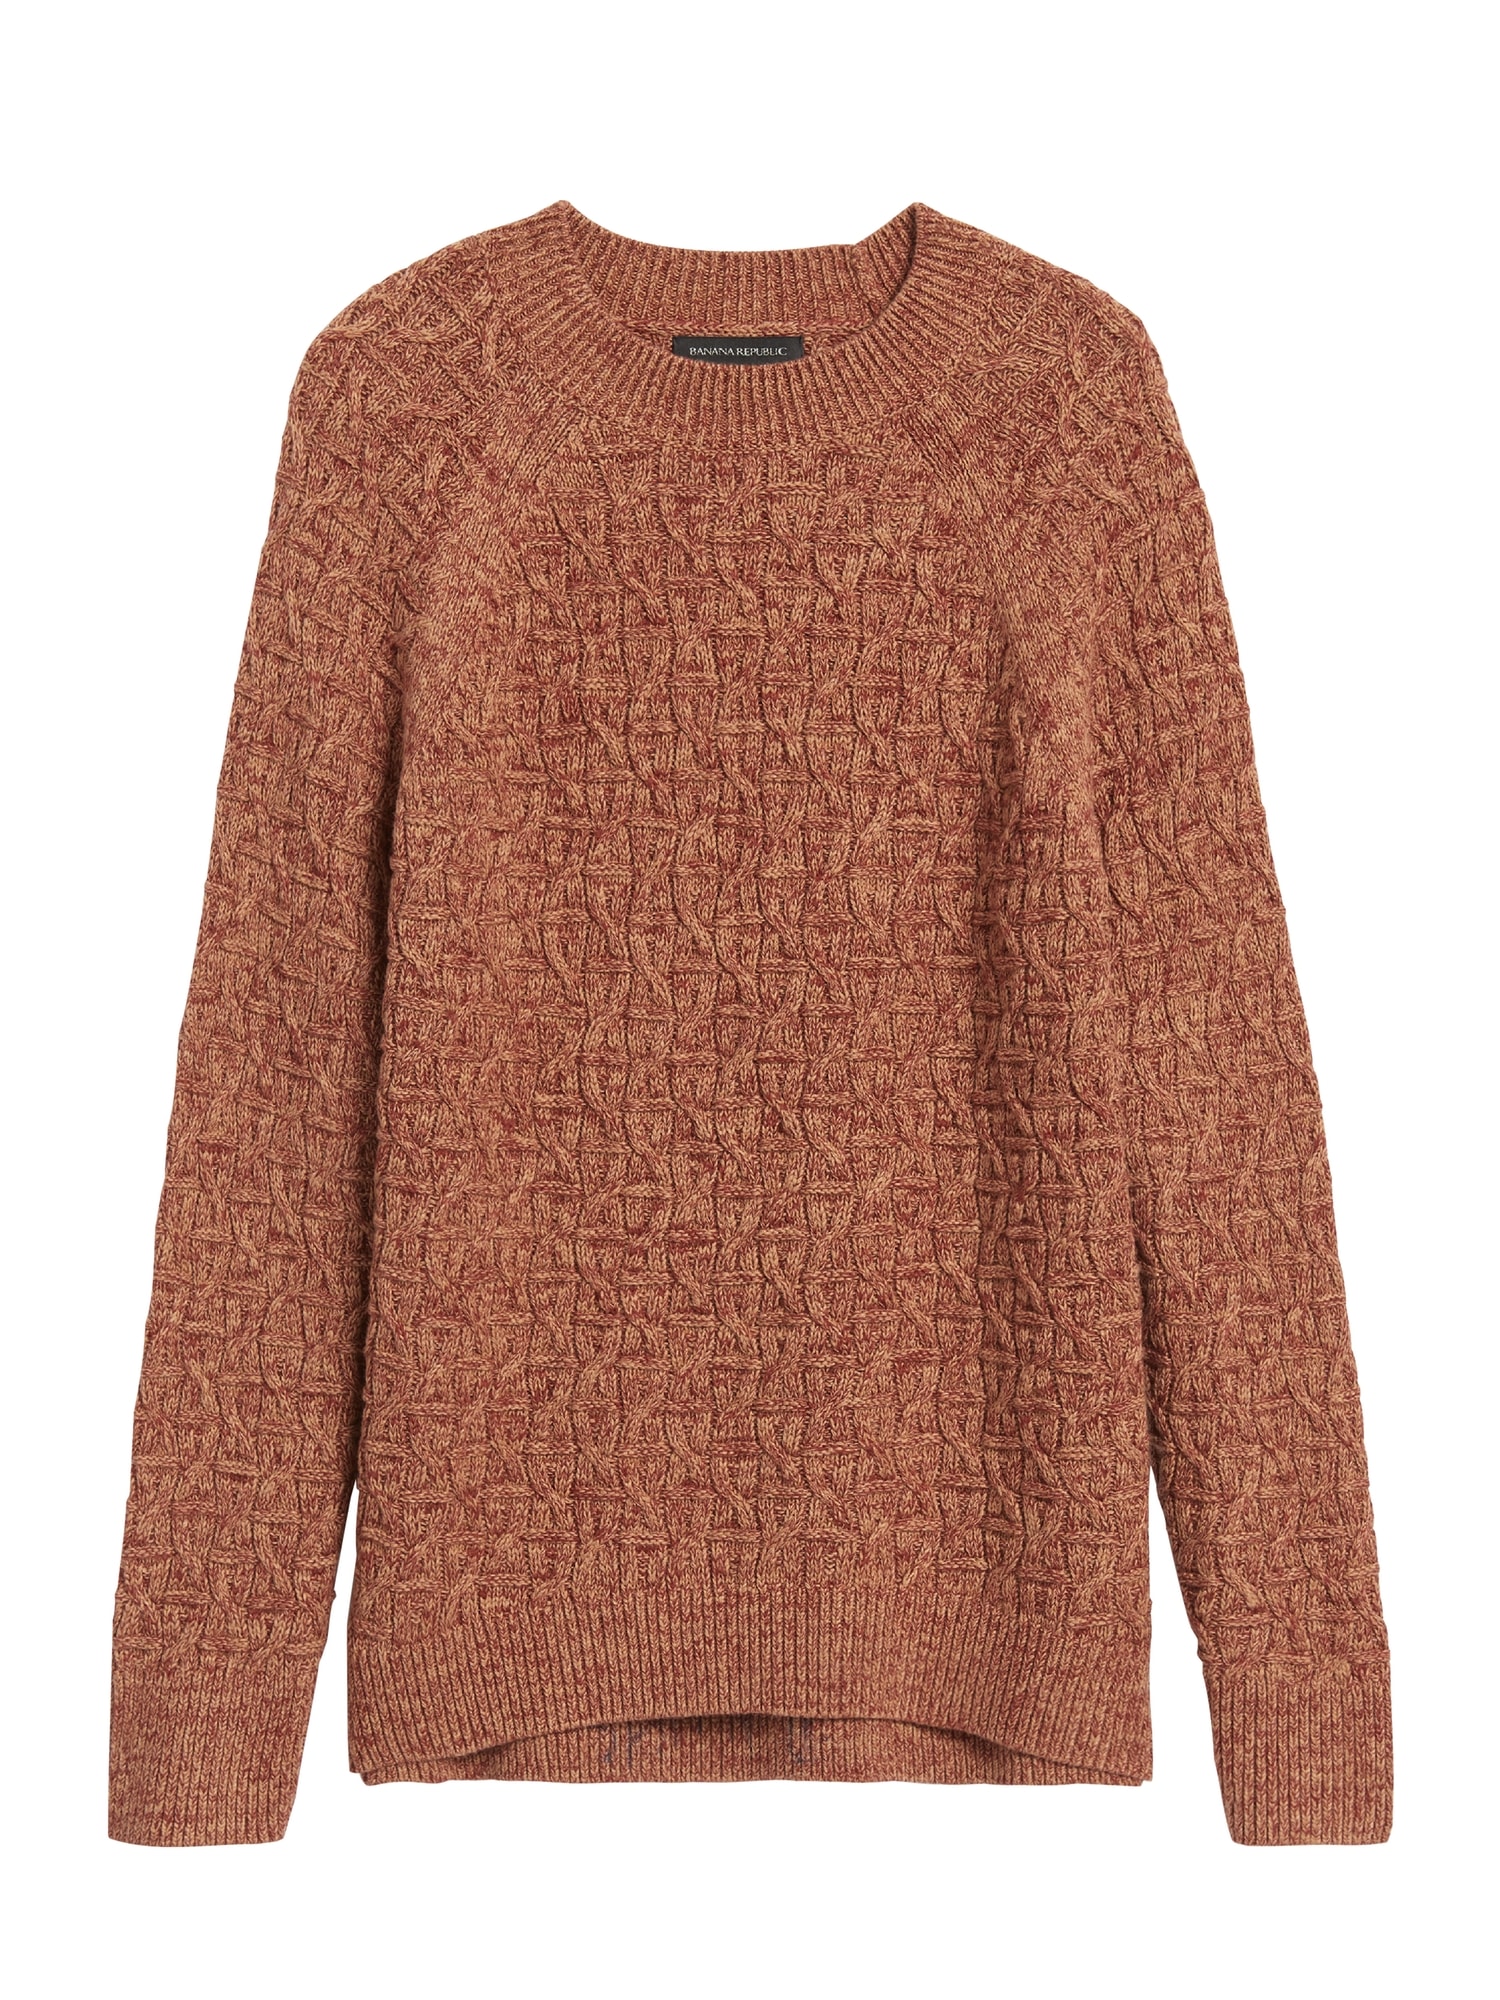 Marled Cable-Knit Sweater | Banana Republic